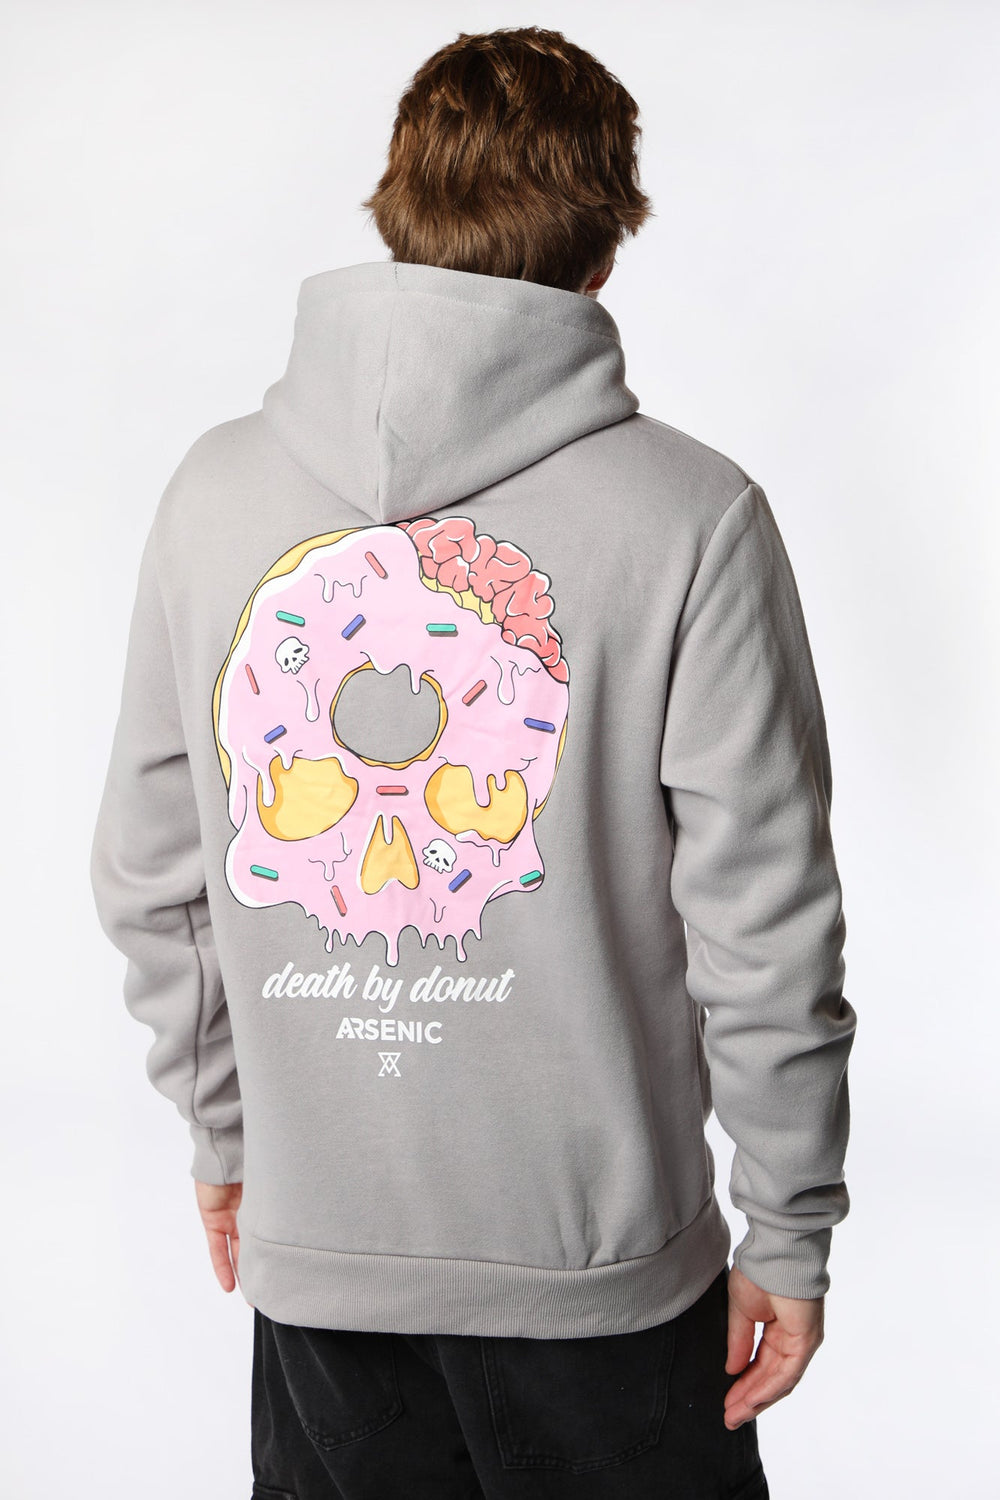 Arsenic Mens Death by Donut Hoodie Arsenic Mens Death by Donut Hoodie